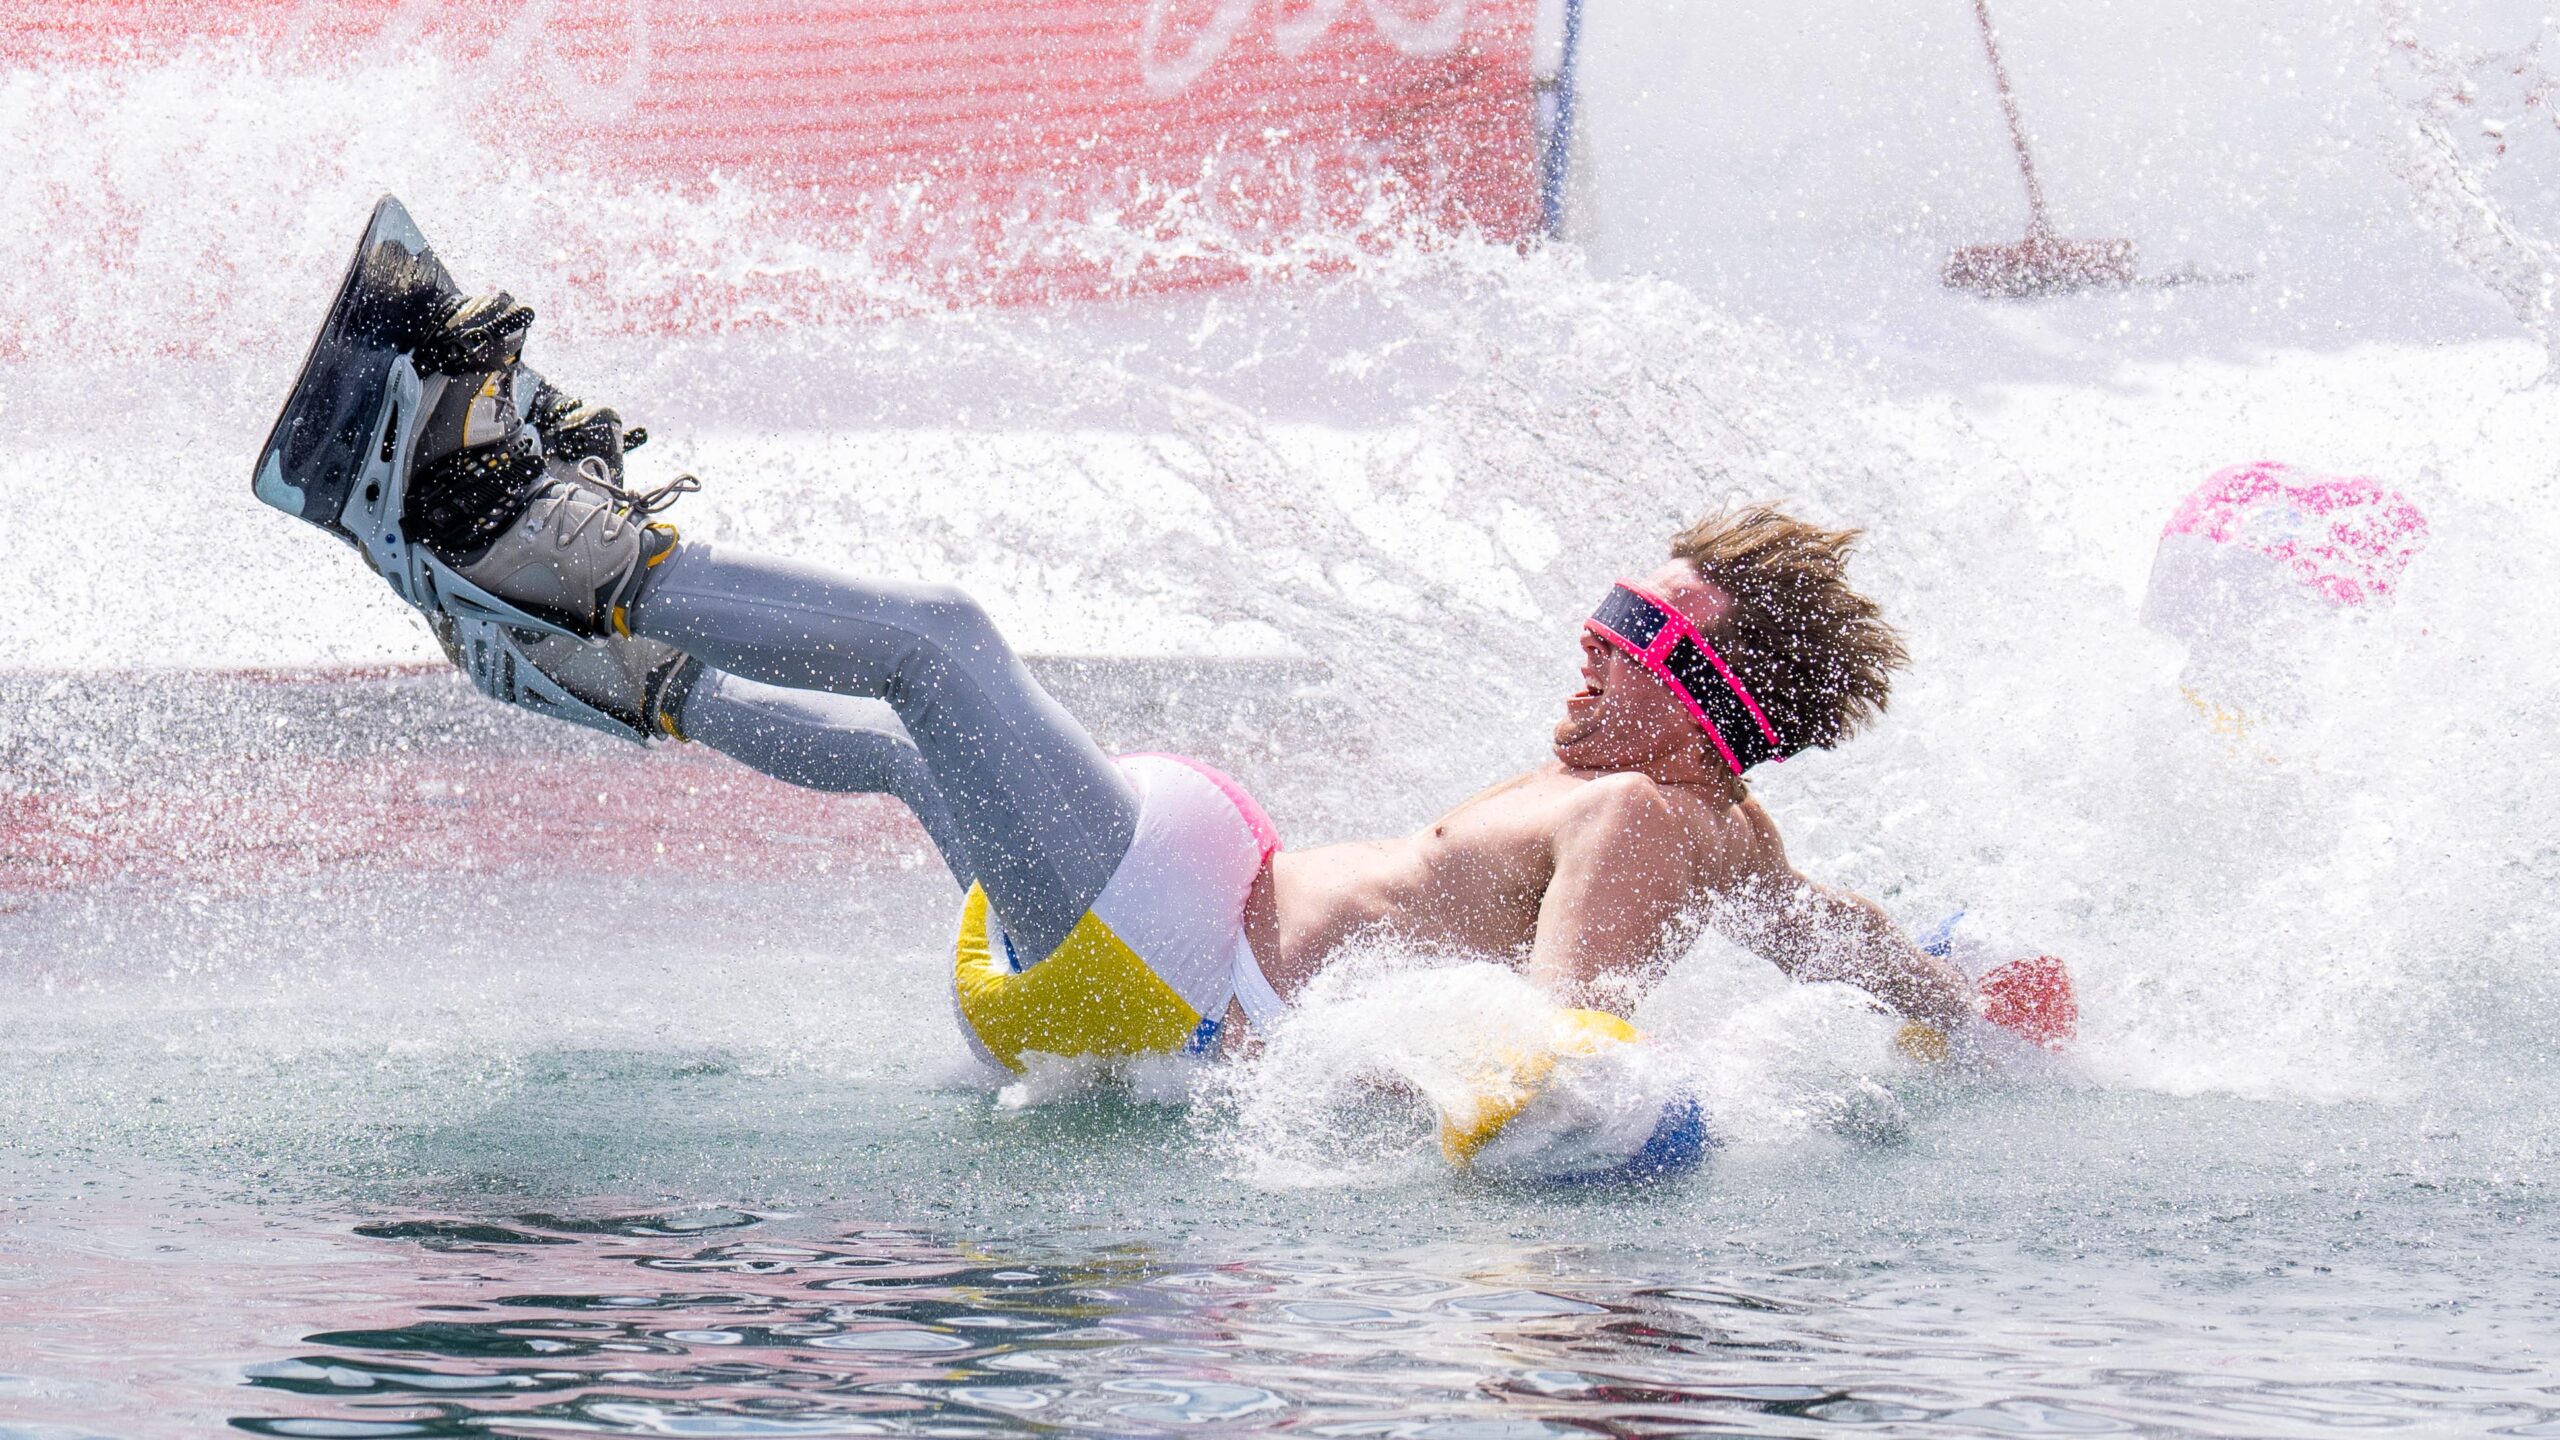 Epic crashes from the Park City Mountain's Pond Skimming Championships